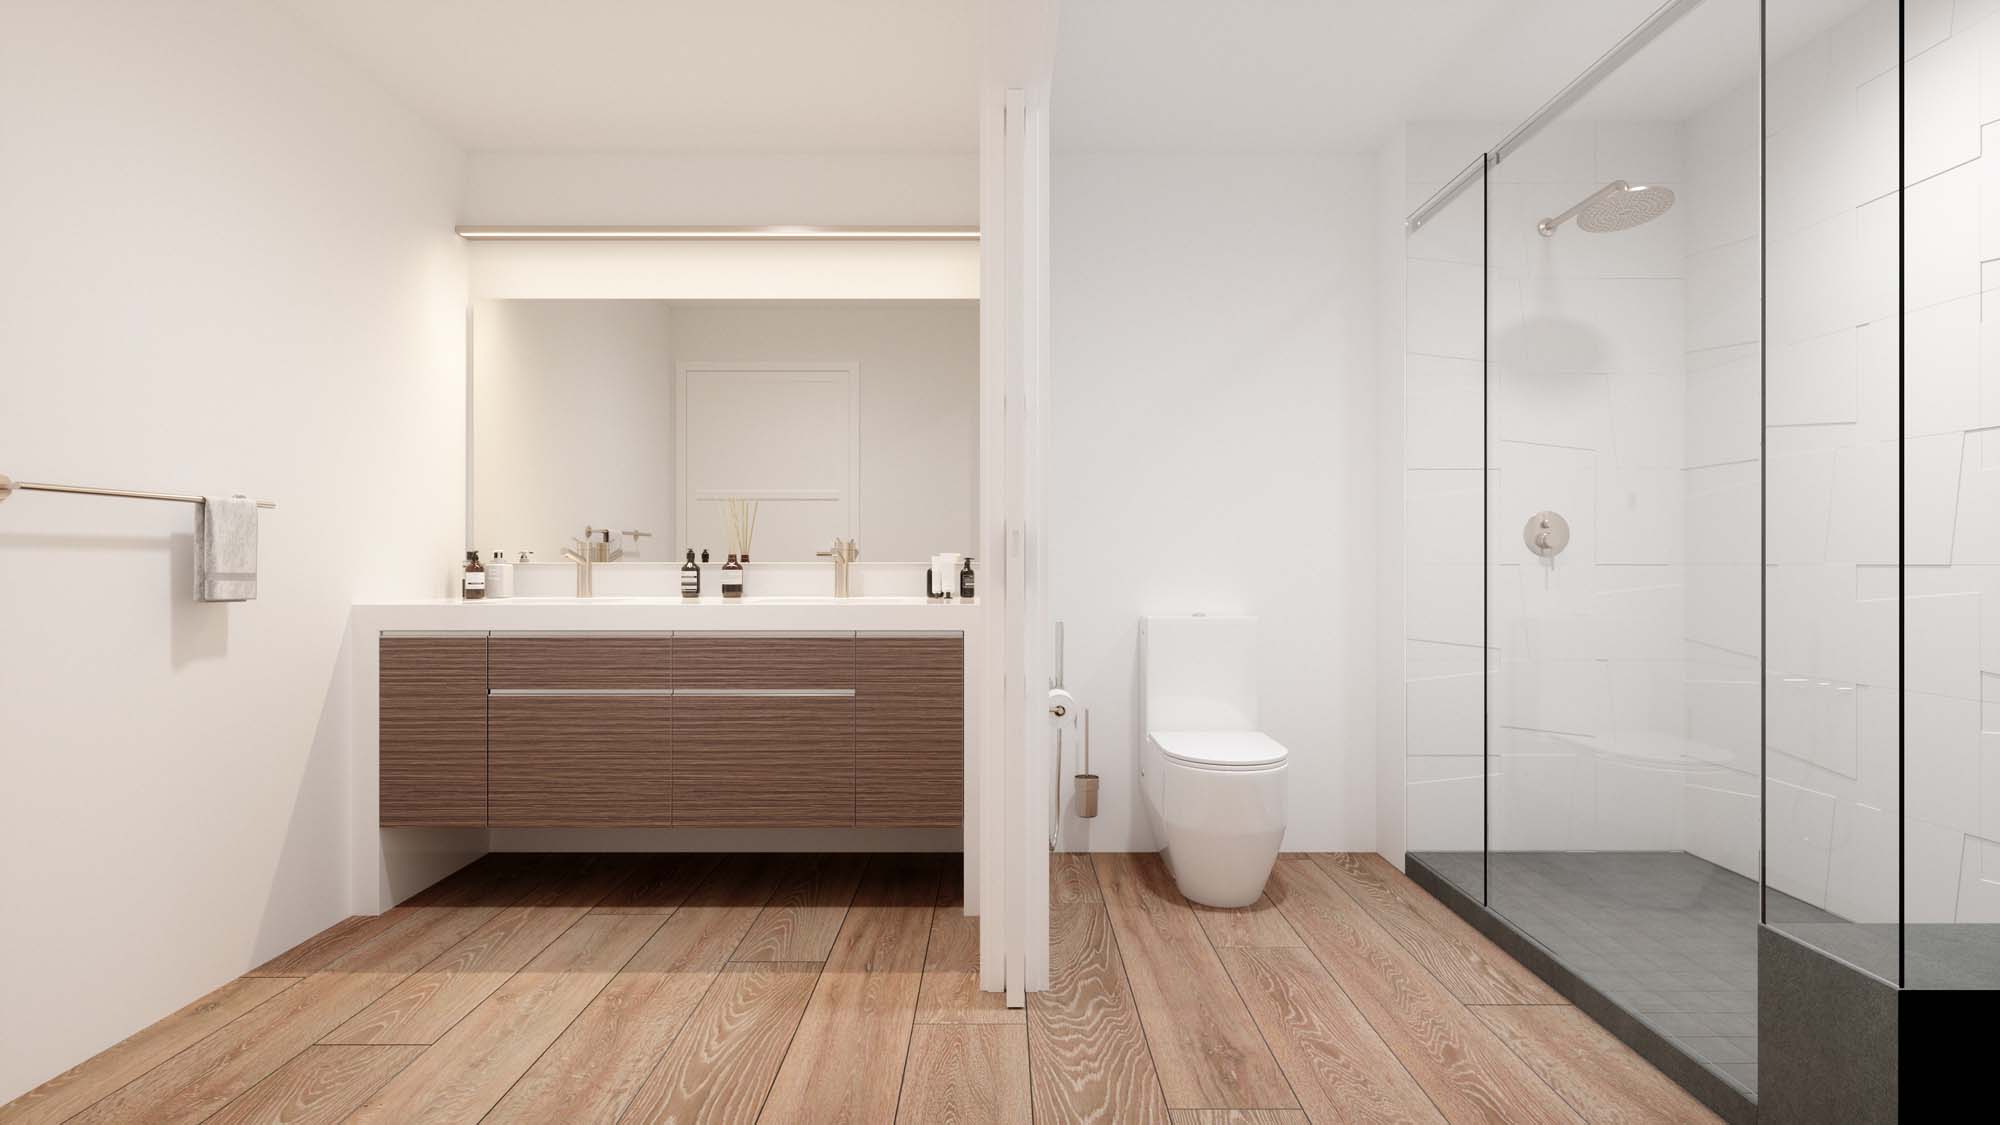 bathroom area with wood-style flooring, dual sink, stand up shower, and single mirror